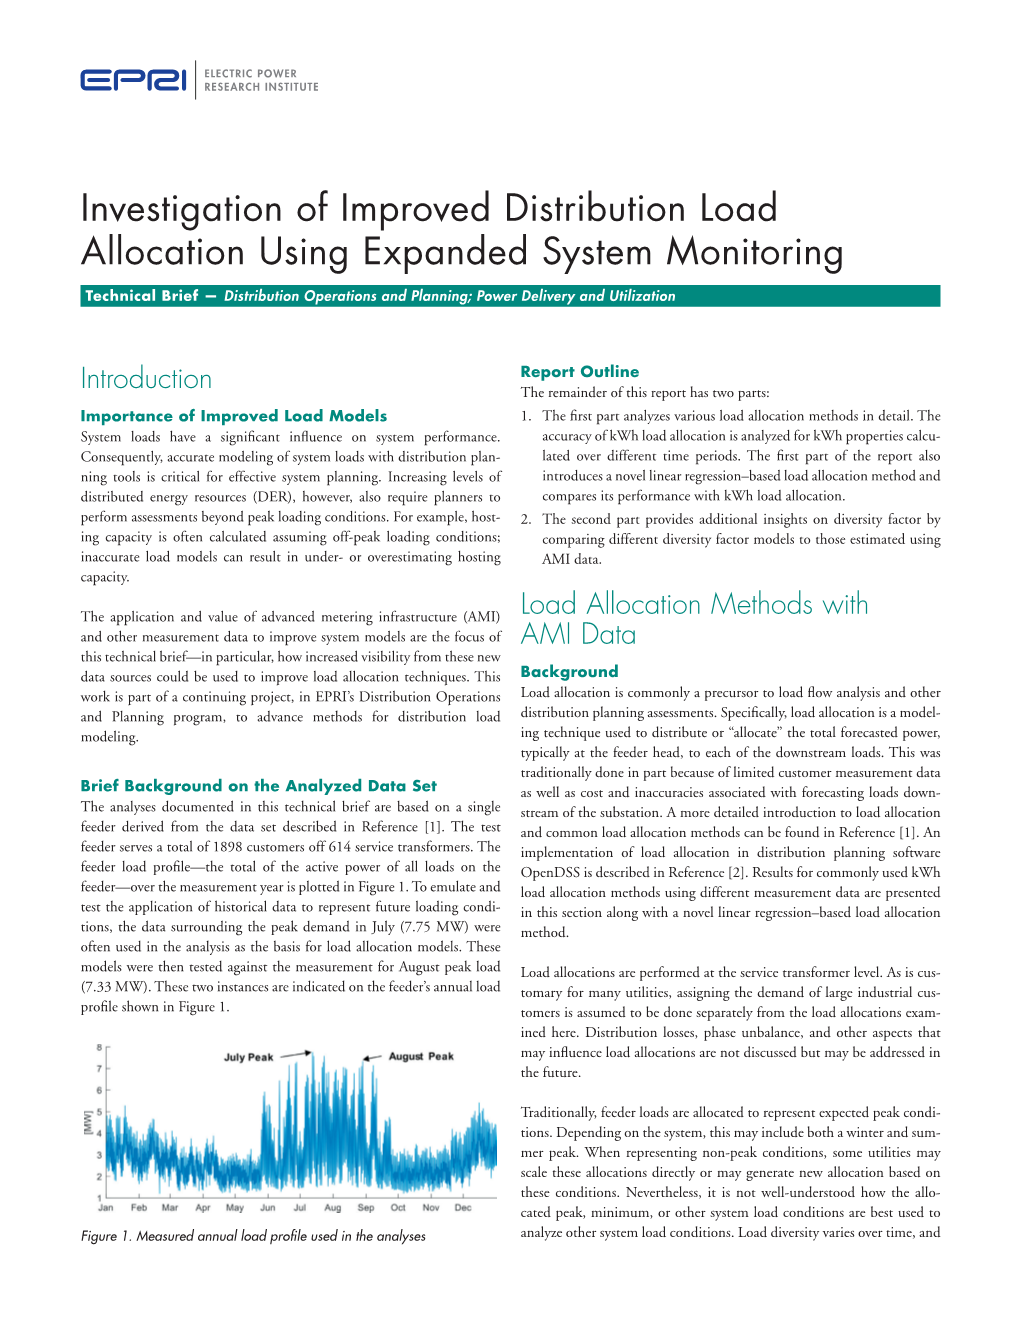 Investigation of Improved Distribution Load Allocation Using Expanded System Monitoring